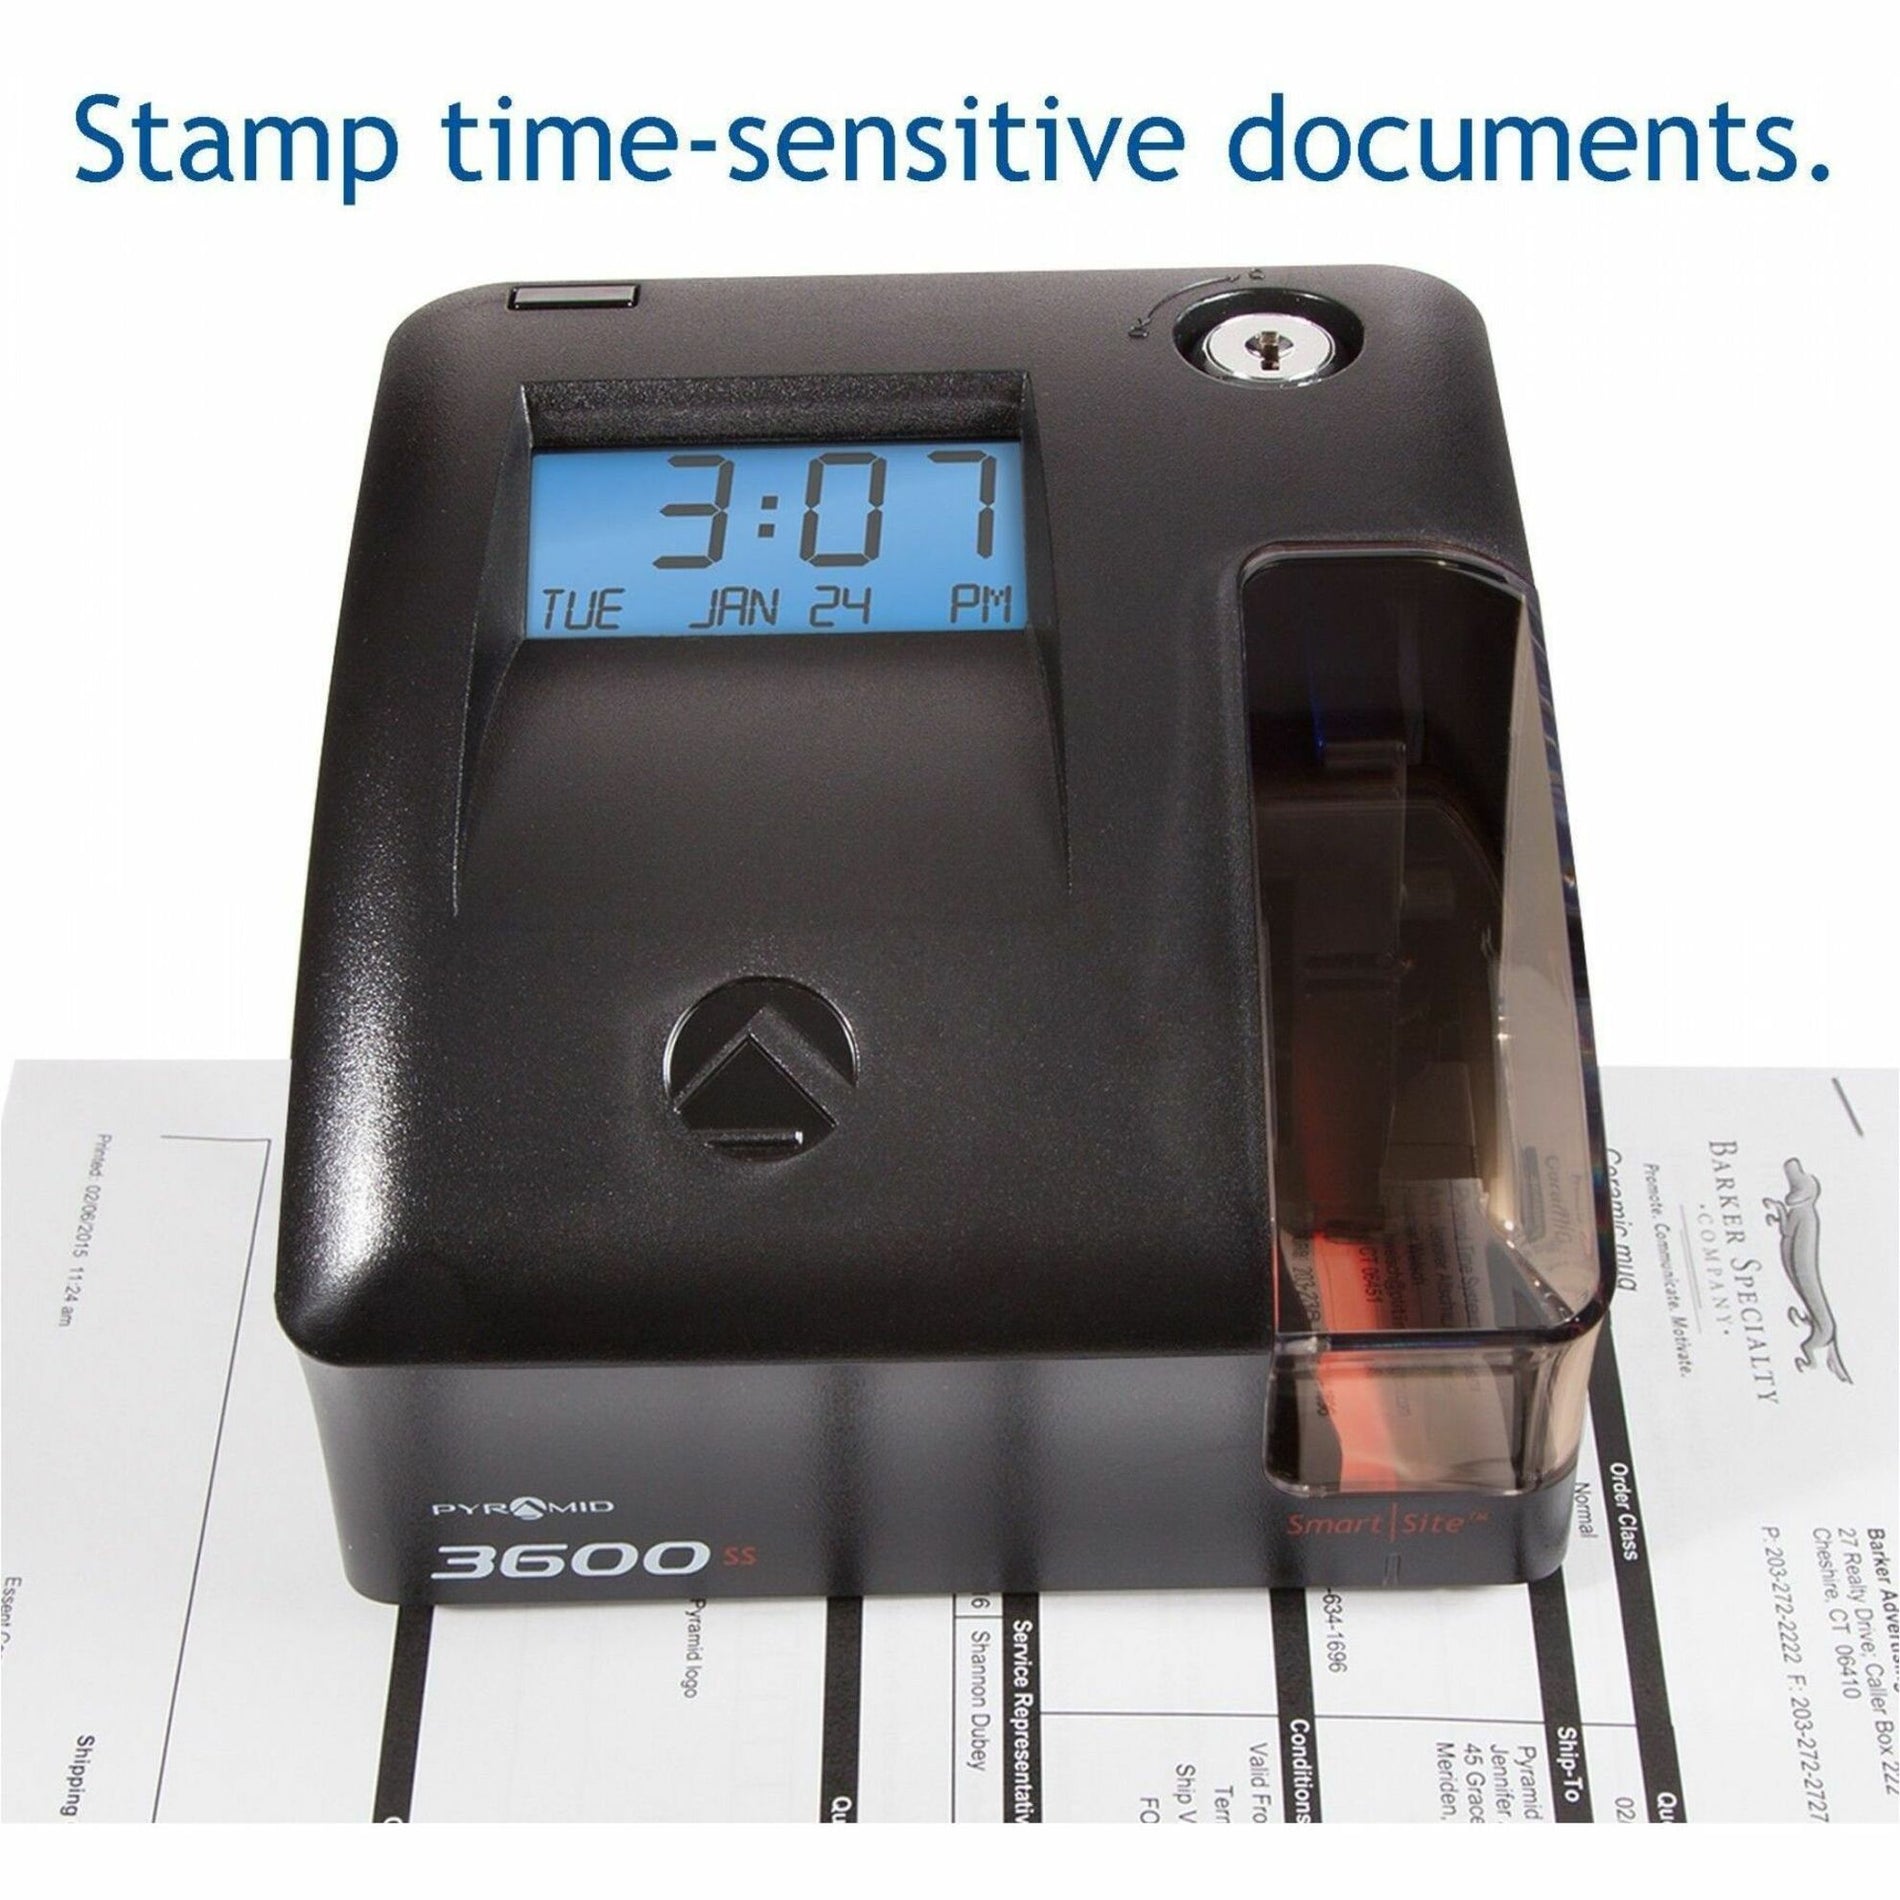 Pyramid Time Systems 3600SS Time Clock and Document Stamp, Unlimited Employees, LCD Screen, Dot Matrix Printer